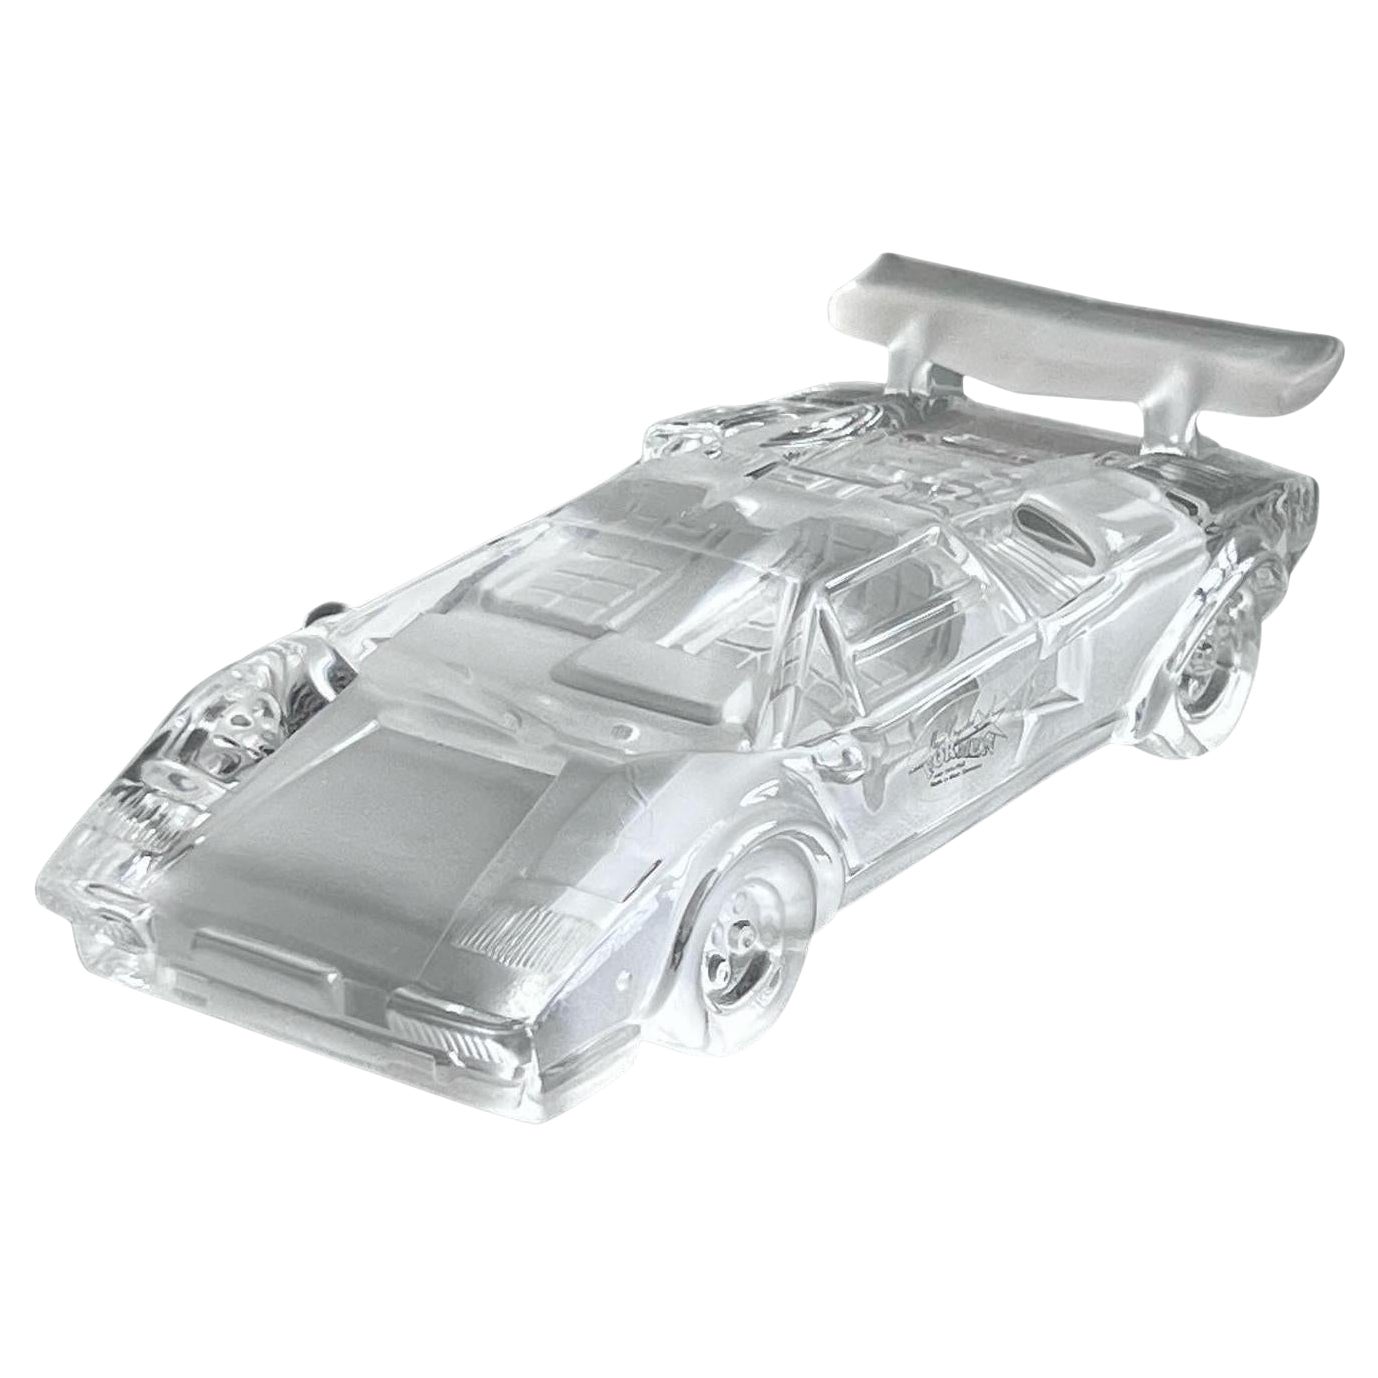 Lamborghini Countach model car in clear crystal, decorative piece, made in Italy